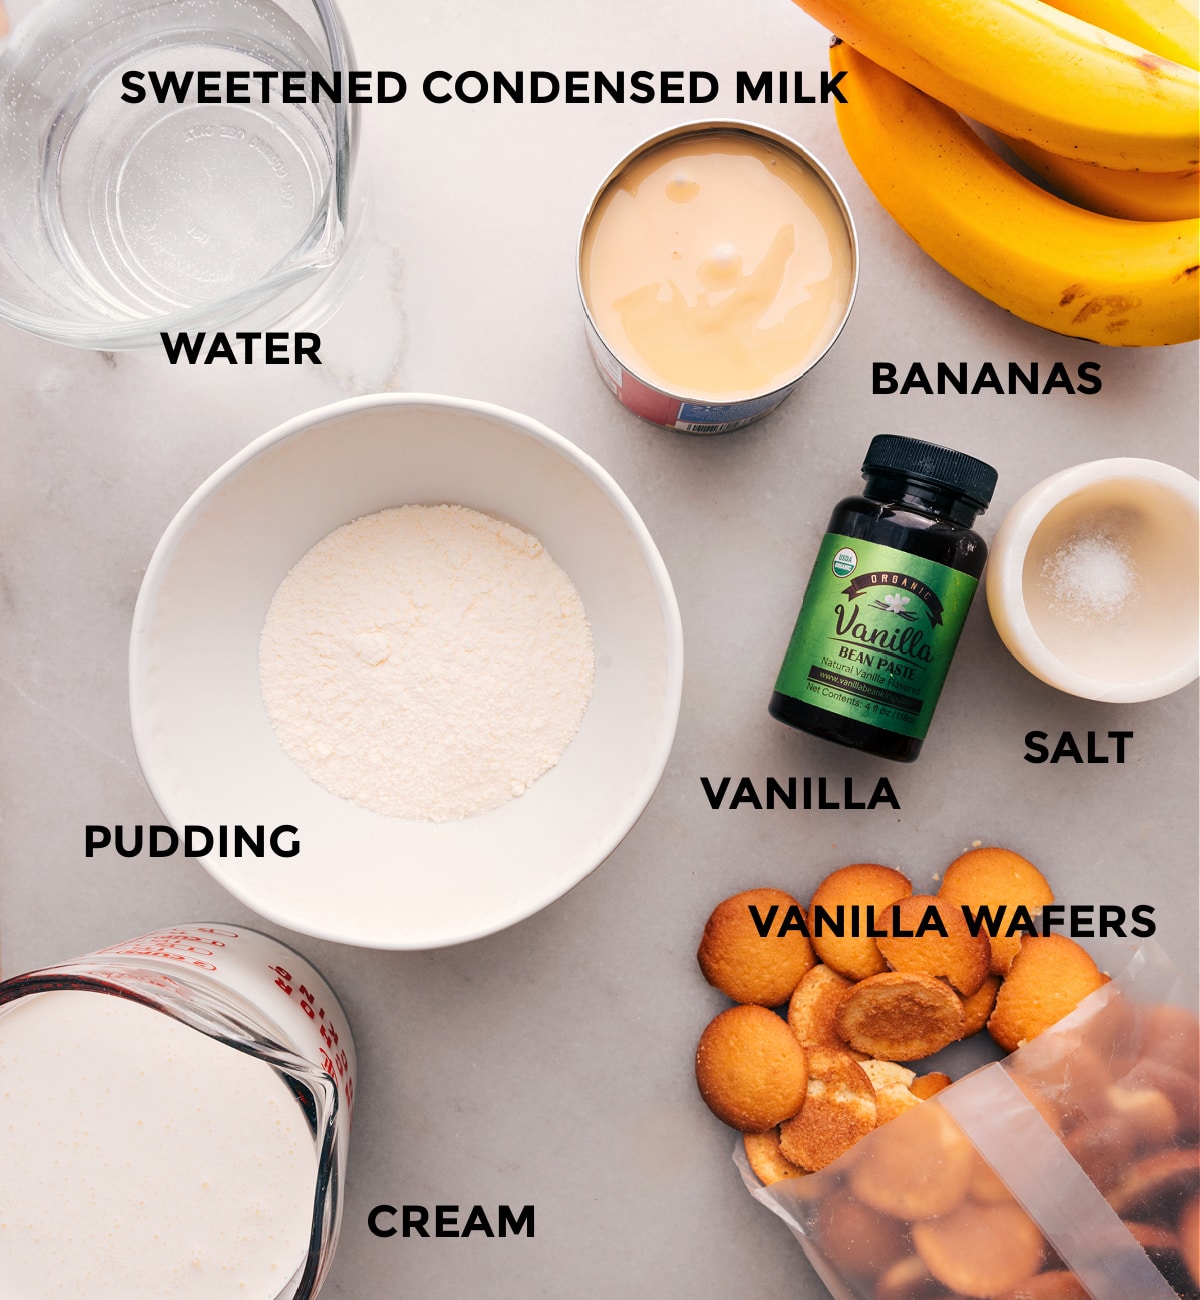 An array of ingredients used to create this dessert, including sweetened condensed milk, vanilla wafers, cream, vanilla, and more, ready to be combined into a delectable dessert.